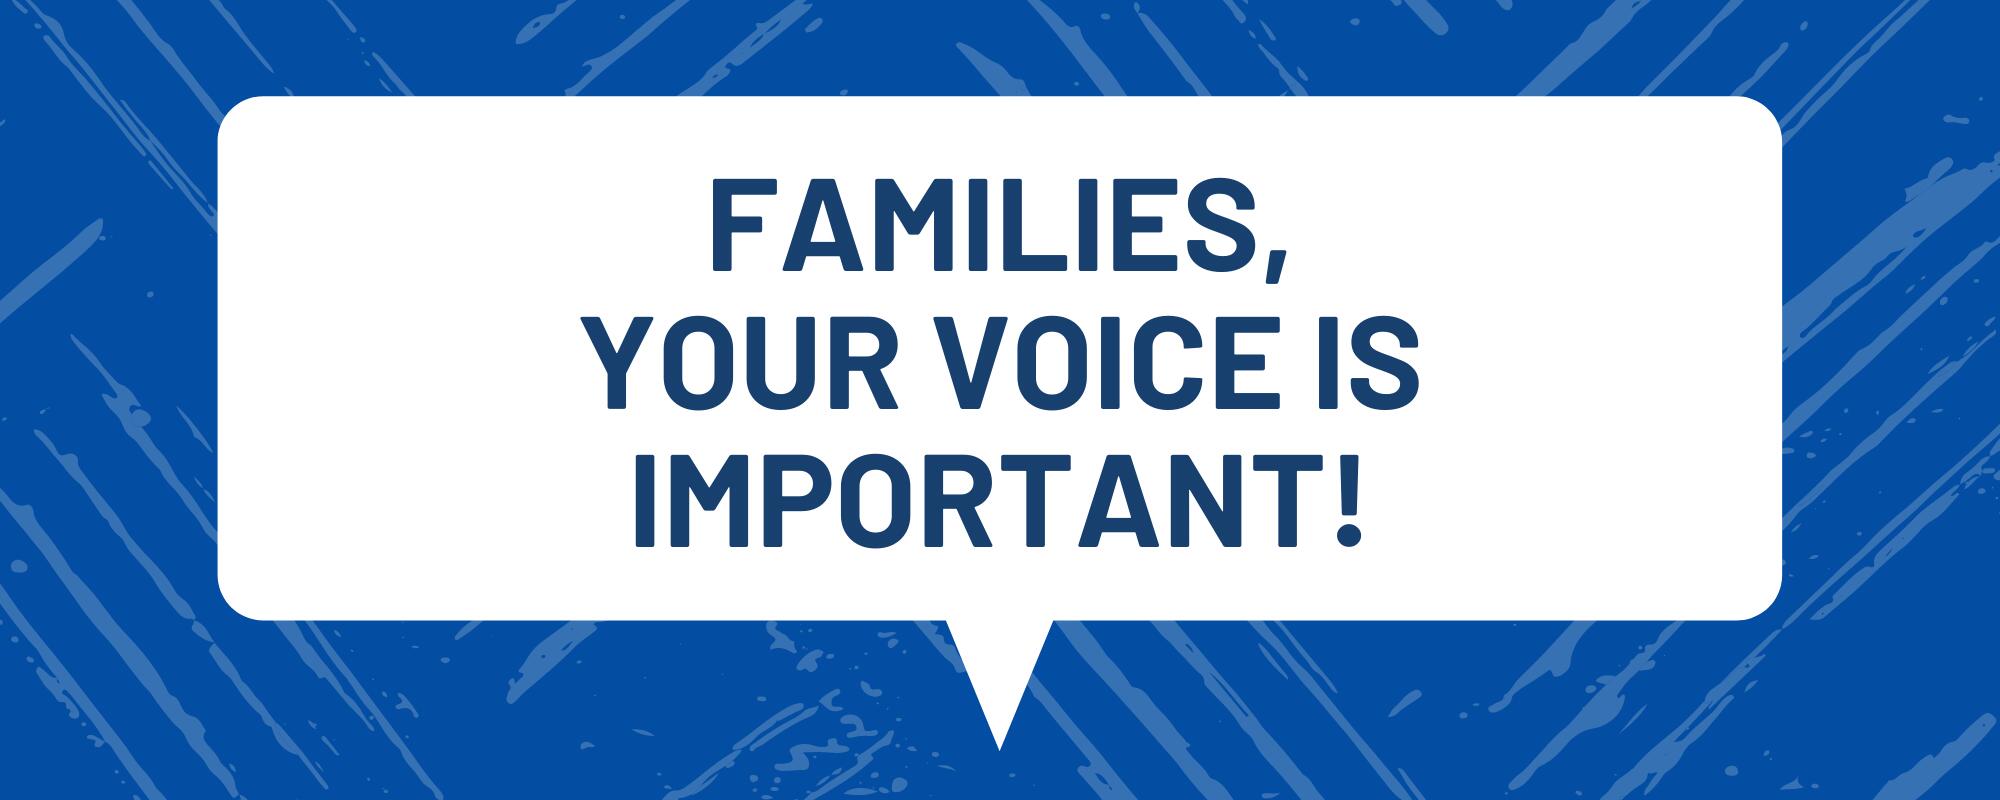 Families, your voice is important!